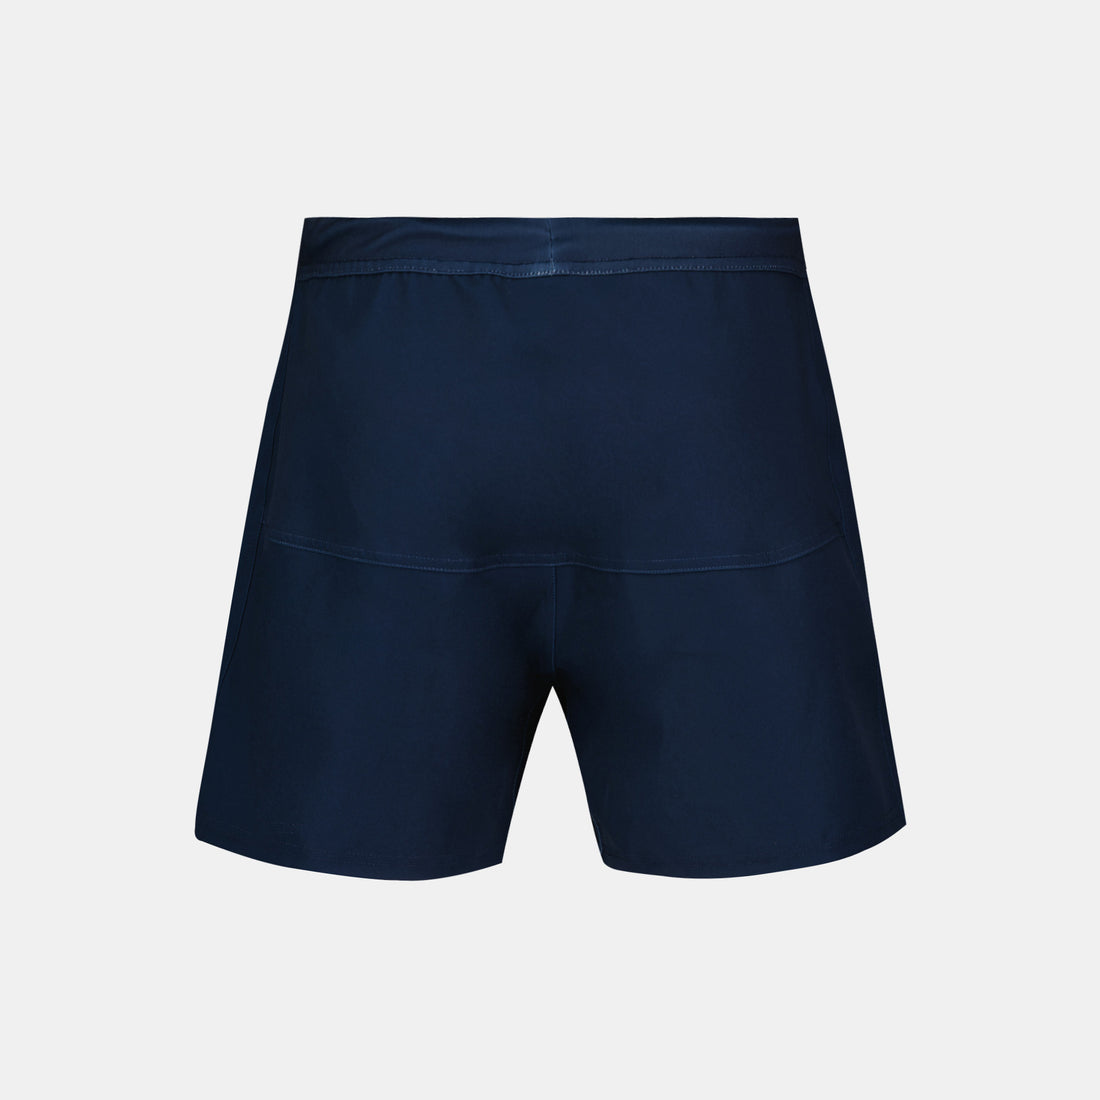 2320316-AB SHORT Rugby M blue navy/fly blue  | Shorts for men